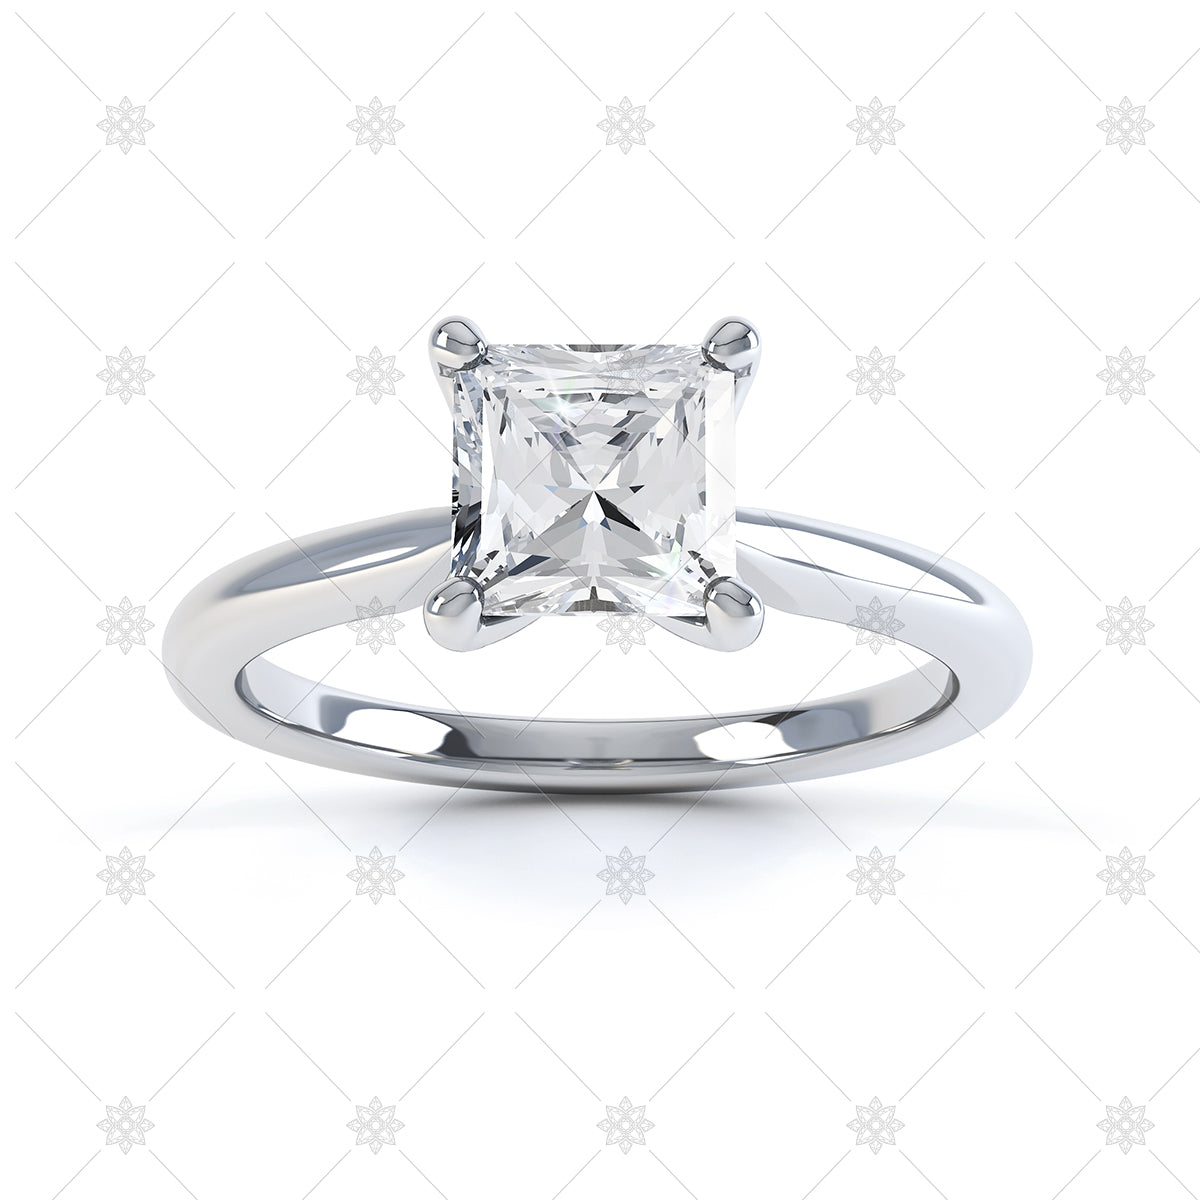 Tina Diamond Solitaire 4 Claw Ring